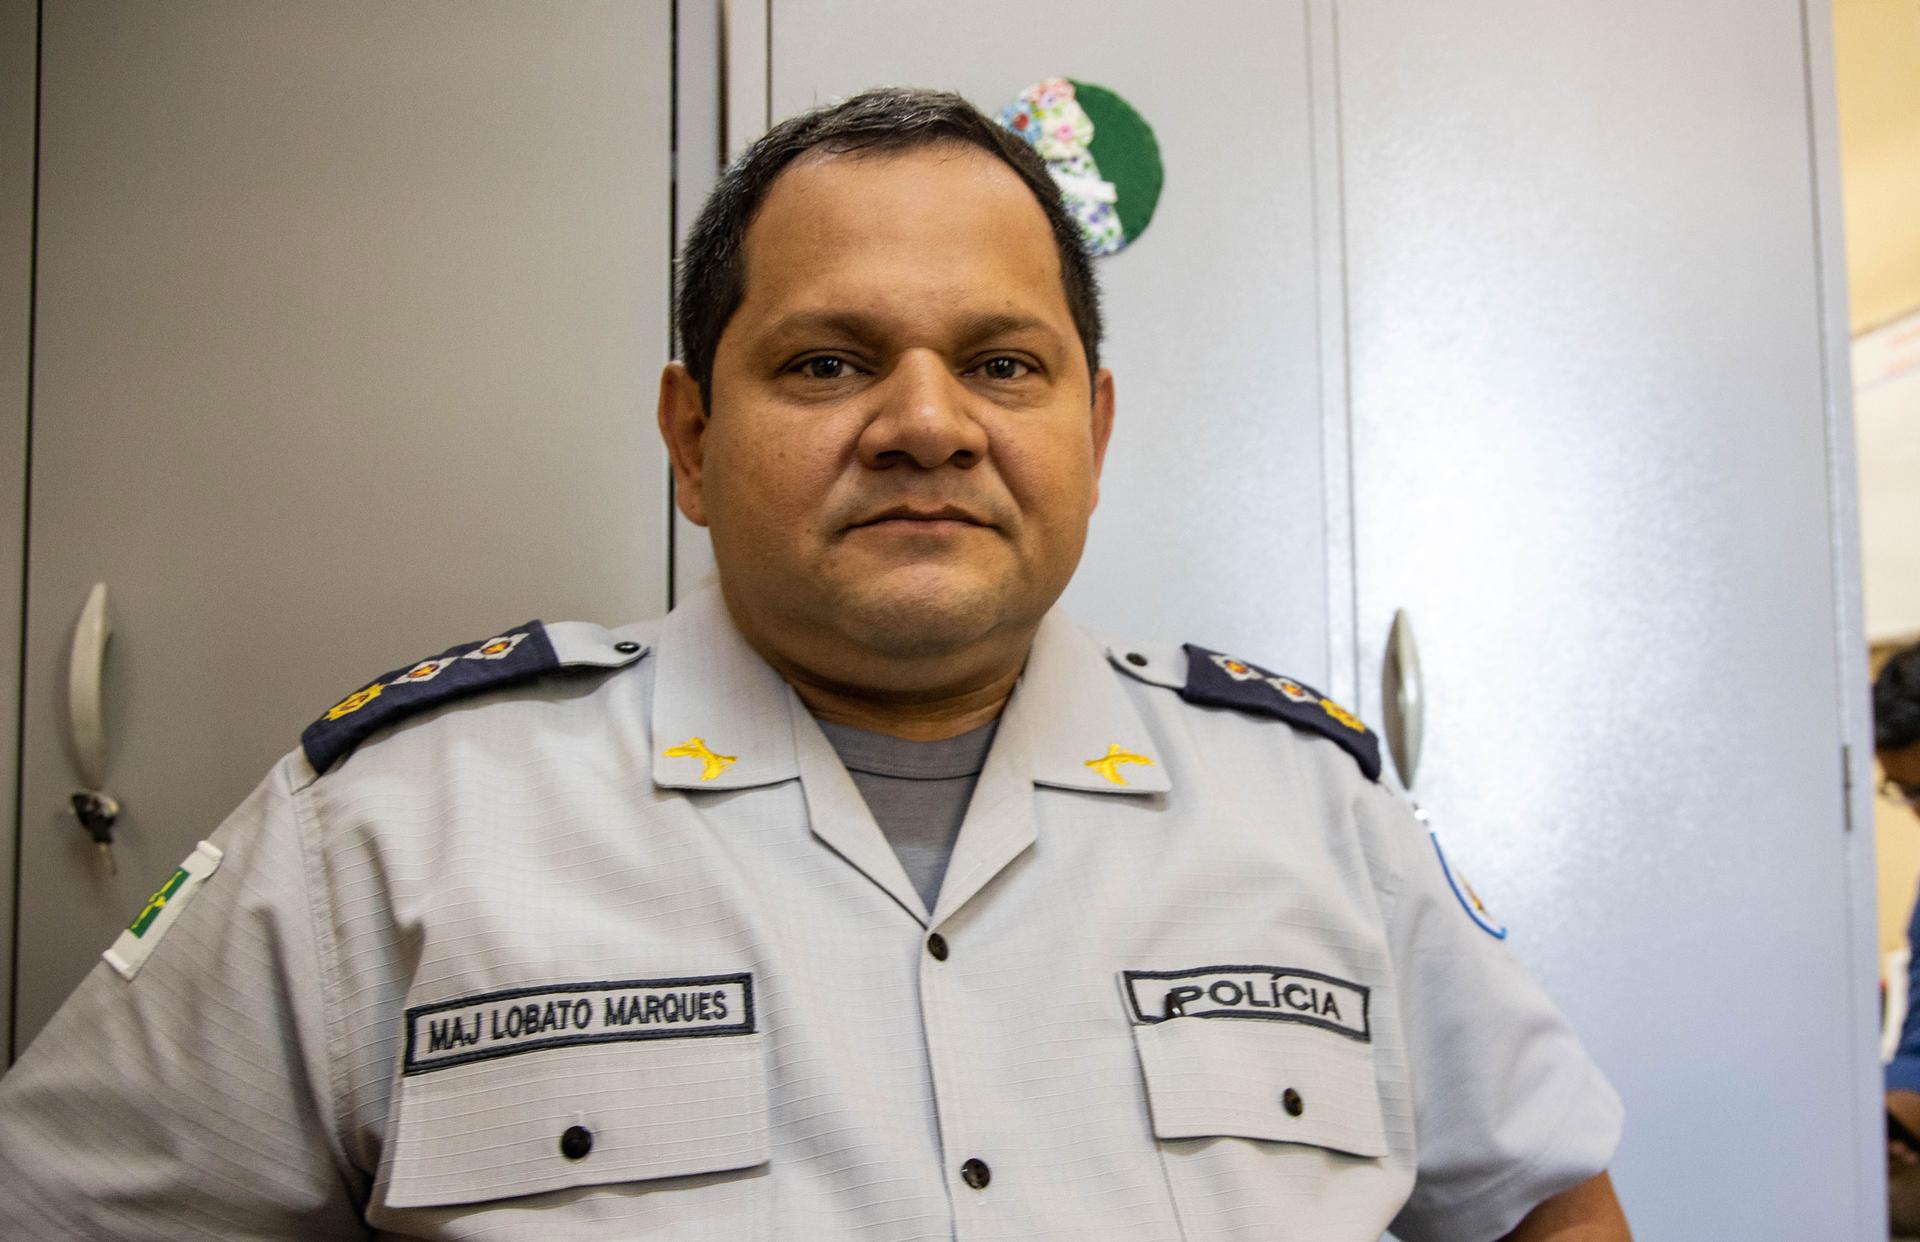 Police officer Roberto Lobato Marques